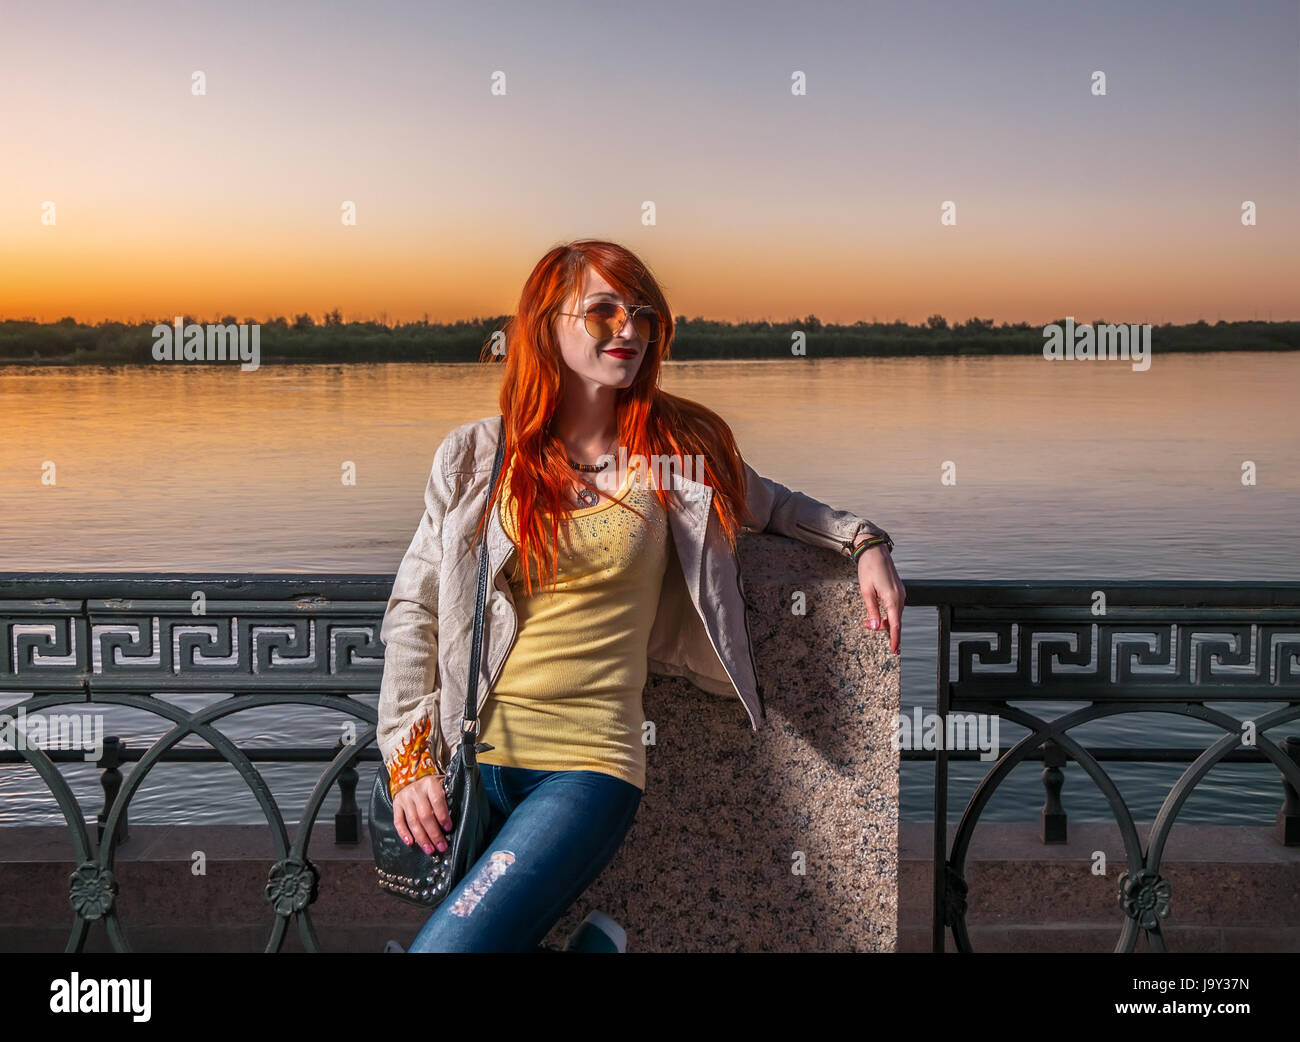 ginger head woman posing in sunglasses on river embankment, image with copy space Stock Photo